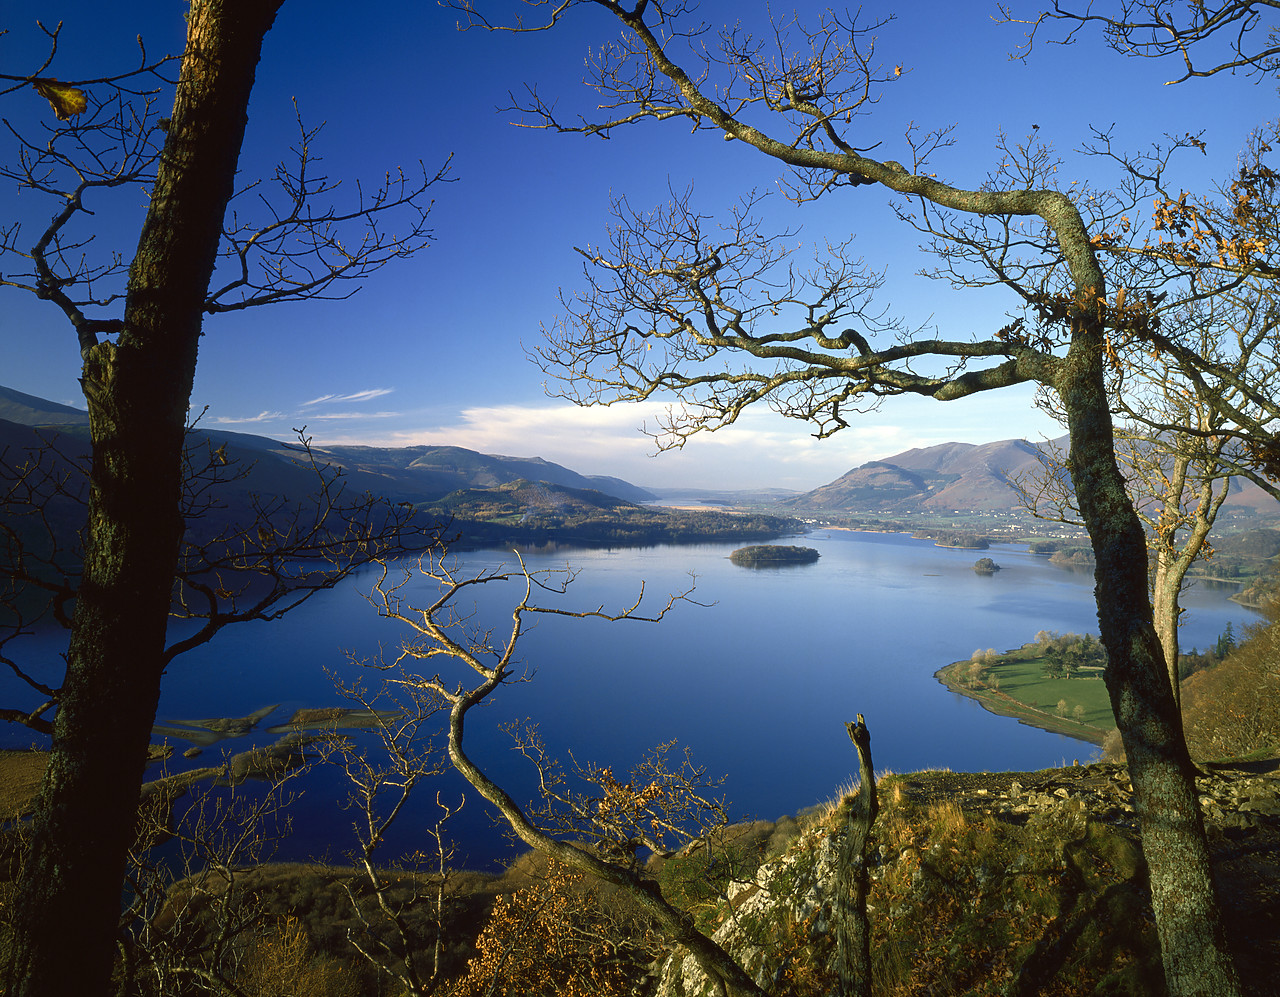 #892553-1 - Derwent Water from Surprise View, Lake District National Park, Cumbria, England